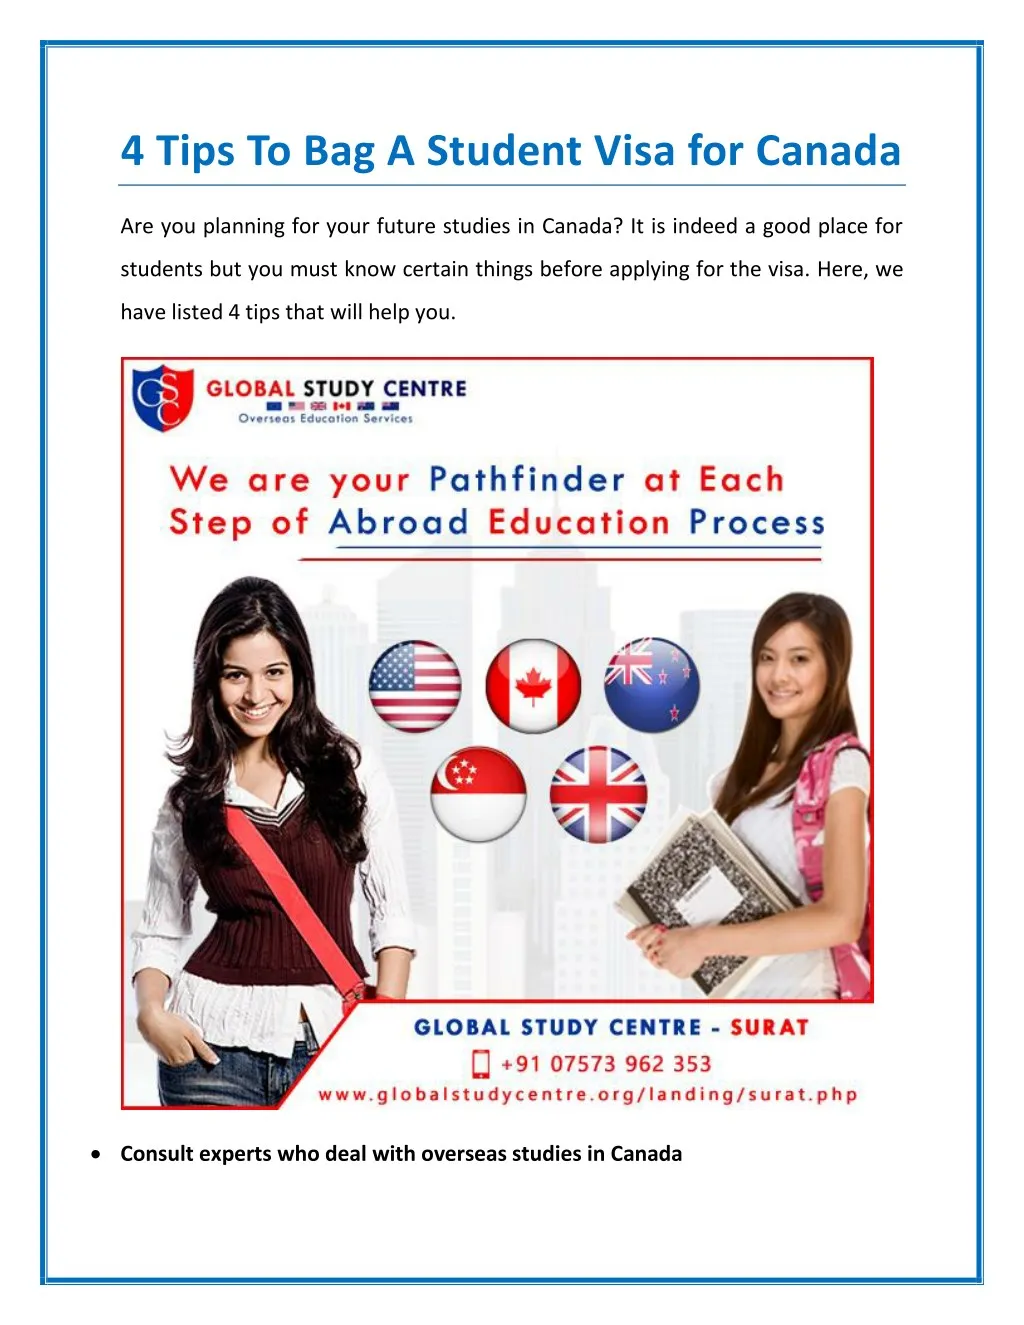 4 tips to bag a student visa for canada